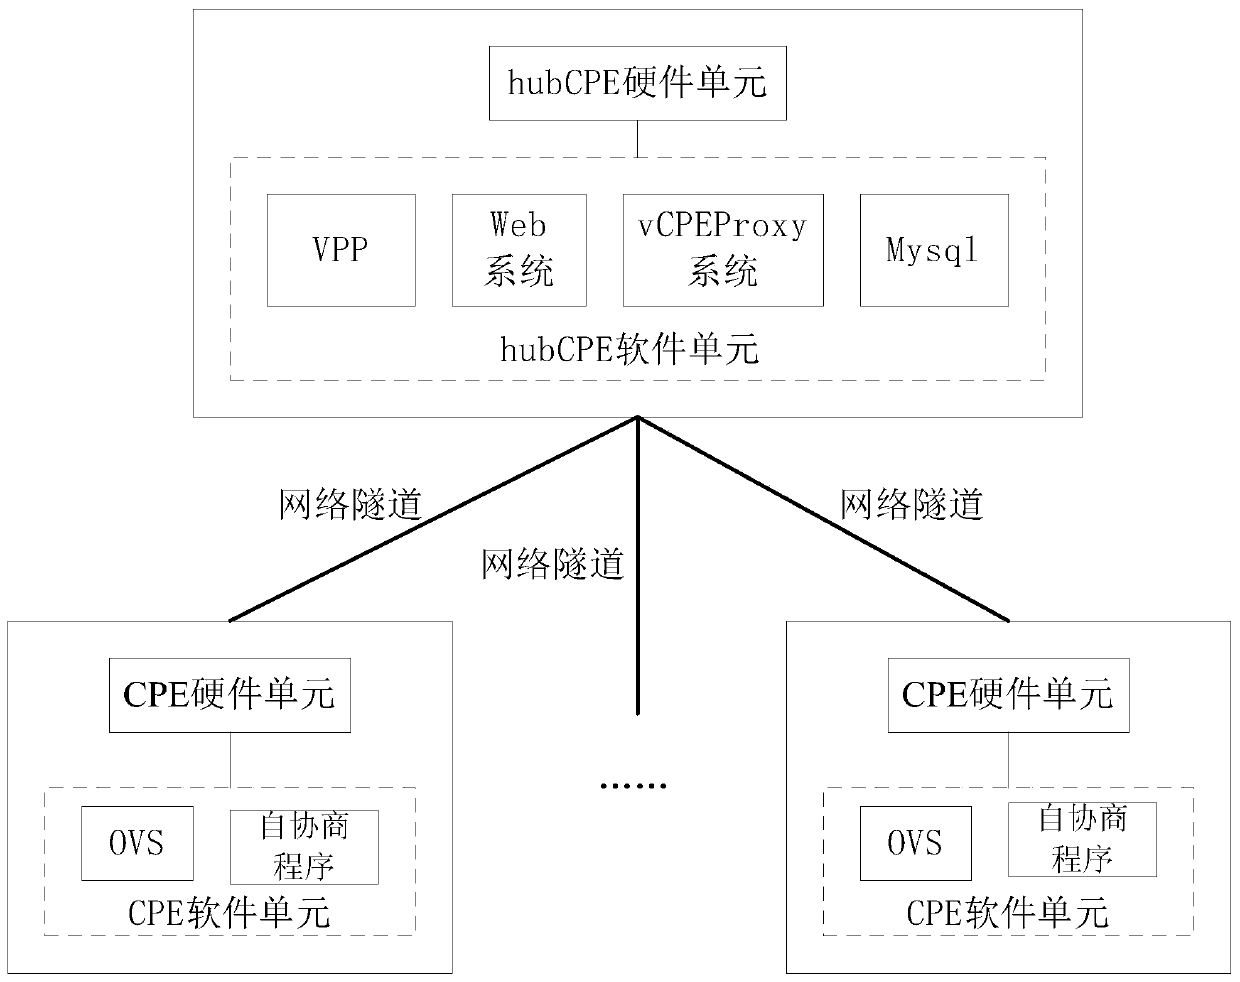 A system and a method for realizing high-speed interconnection and intercommunication based on SDN and NFV technologies